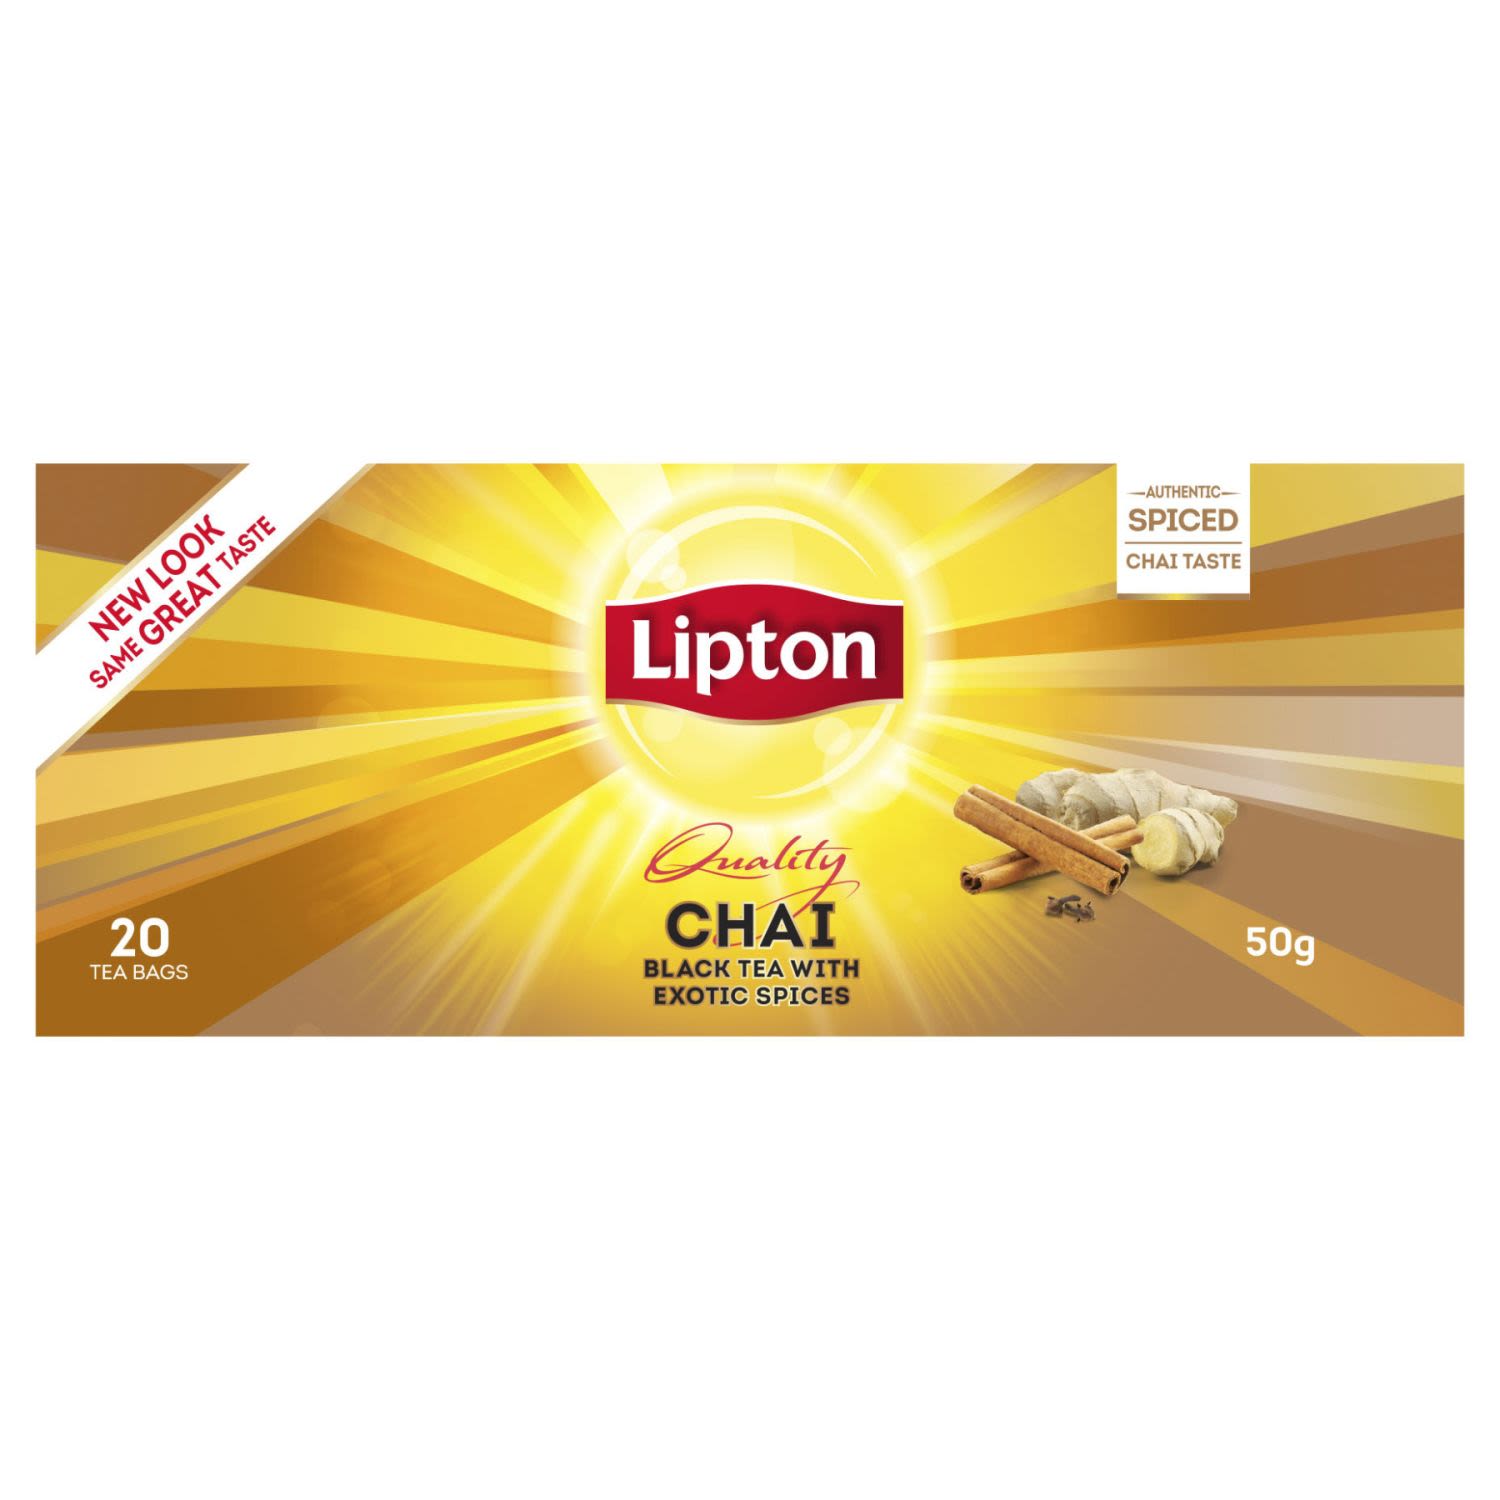 Lipton Chai Tea combines the natural goodness of tea with 22% exotic spices including Cinnamon, Ginger, Black Pepper and Cloves. The tea bags are a wonderful way to make your Chai just the way you like it. How strong the spicy flavour or how much milk or sugar you add is up to you for a delicious authentic chai tea. A refreshing taste for a feed good moment. At Lipton we recognise the importance of sustainability in the growth of our tea. With over 100 years of experience our approach to sustainability is holistic. We looked in detail at the social, environmental and economic aspects of tea production carrying out our own work and working with Rainforest Alliance to ensure all our tea is sourced sustainably. Now, all our tea blends are made with 100% natural, Rainforest Alliance™ certified tea leaves. Tea was originally an expensive drink, enjoyed exclusively by the wealthy. Thomas Lipton was a man on a mission – to share his passion for tea around the world. He believed that everyone deserved high quality, great tasting tea. And over 120 years later, that belief is still what drives us – inspiring more flavours, more varieties and more love than ever before. All our tea bags are 100% sustainably sourced, which translates into ensuring decent wages for tea farmers around the world together with access to quality housing, education and medical care. Your tea is their brighter future. Visit our website to see our full range of flavours such as chai vanilla, vanilla chai latte, caramel latte and many more.
<br /> <br />